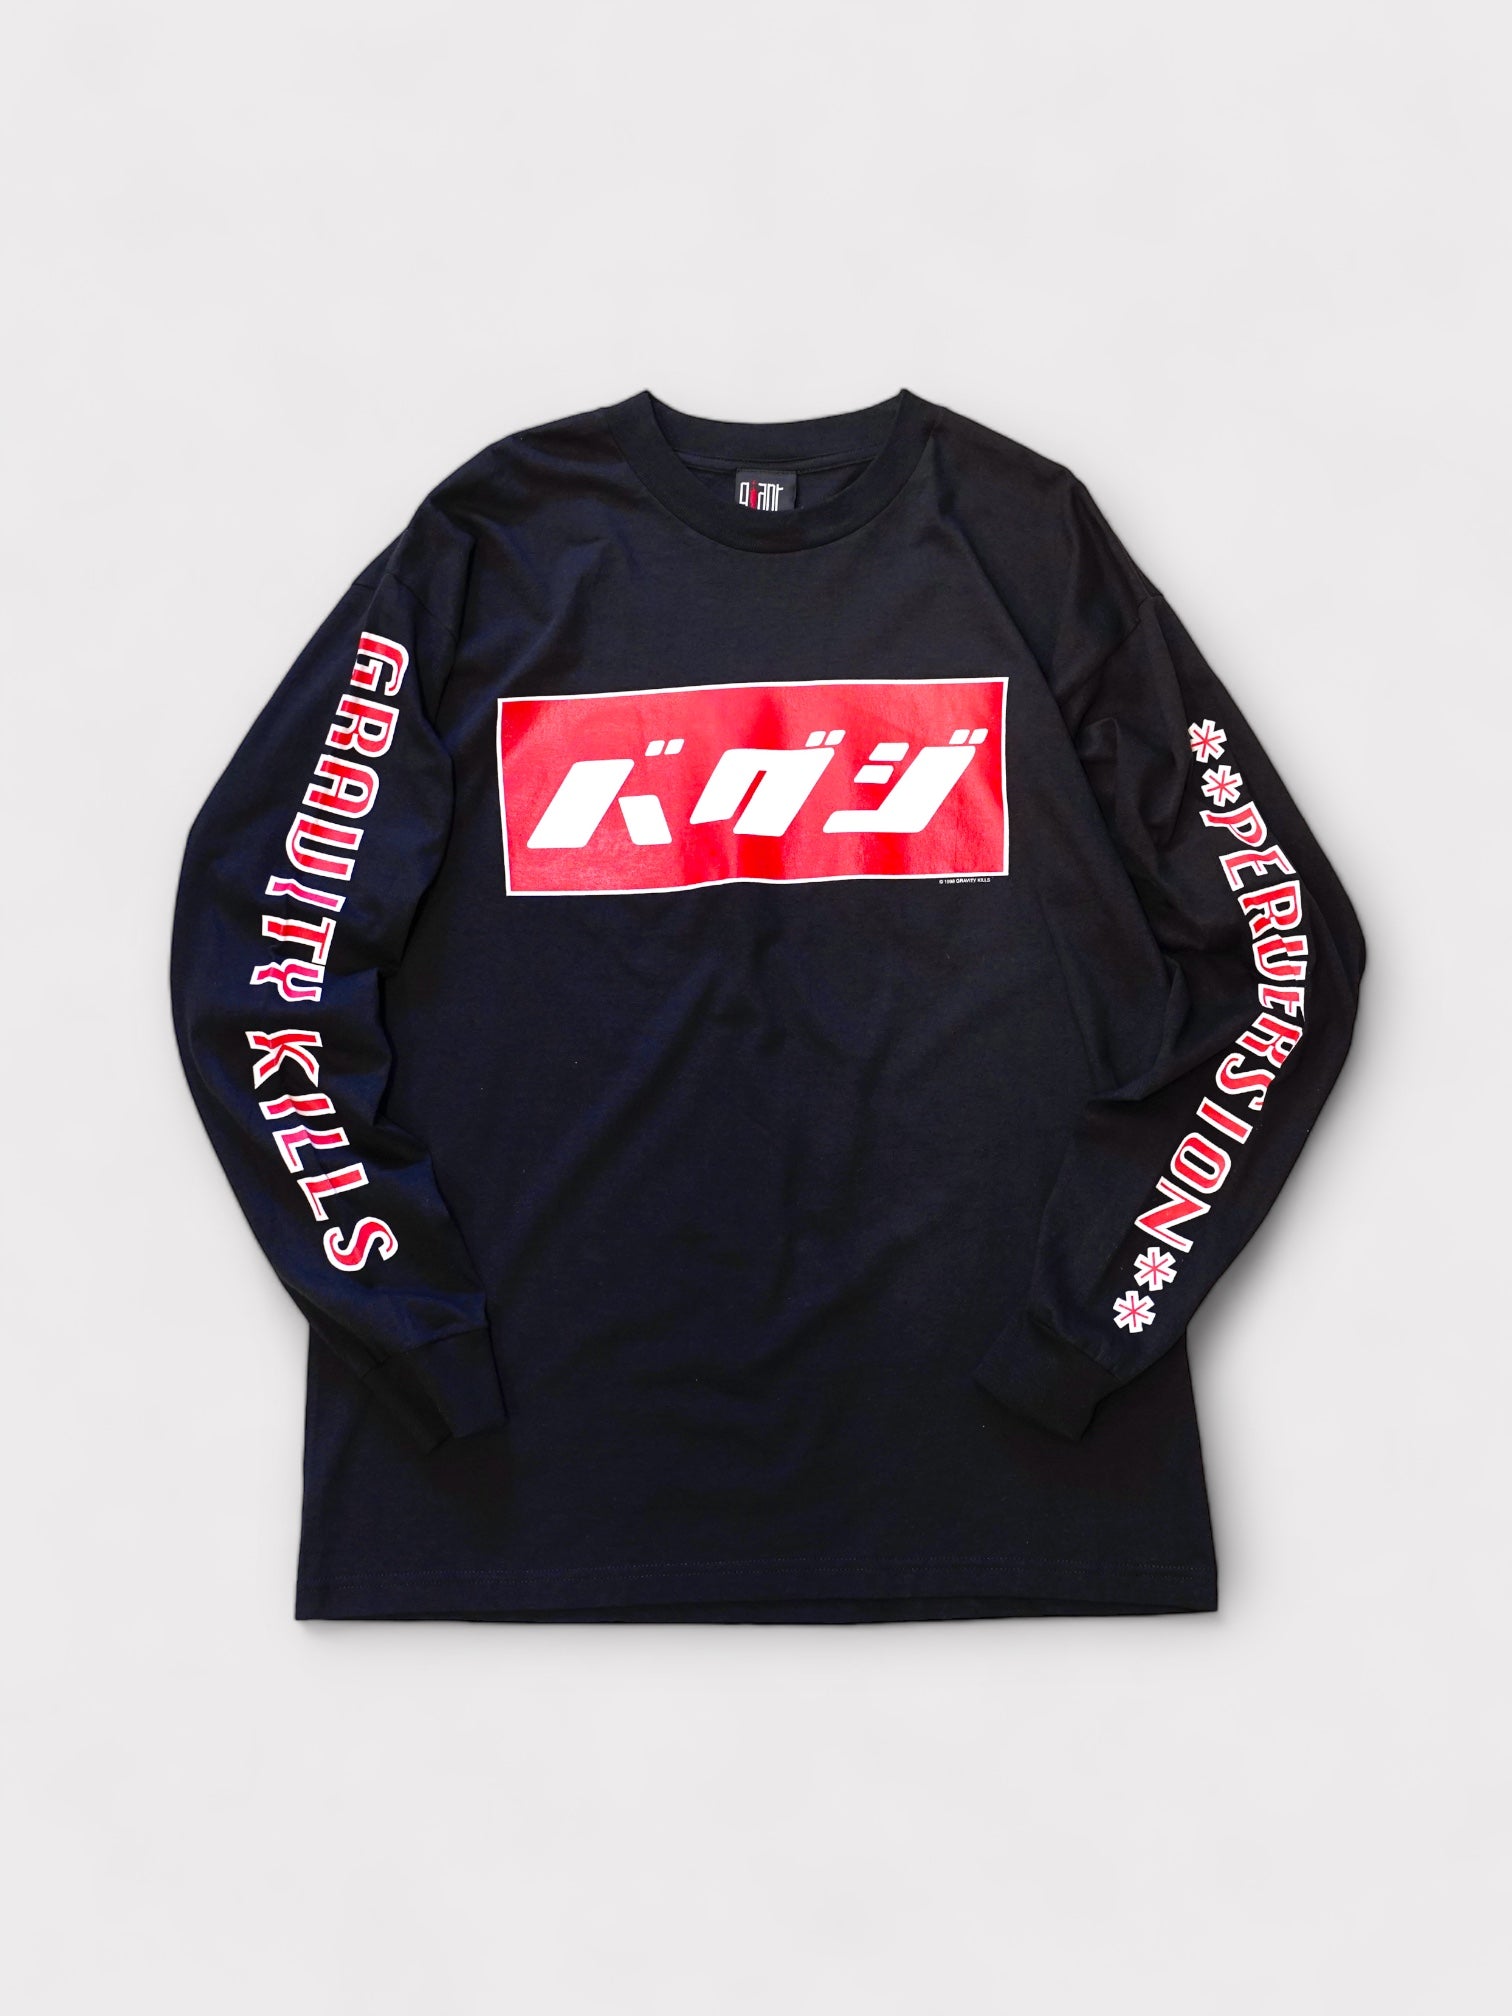 Deadstock 90's Giant "GRAVITY KILLS" "バグジ" L/S made in Mexico【XL】グラヴィティーキルズ ロンT